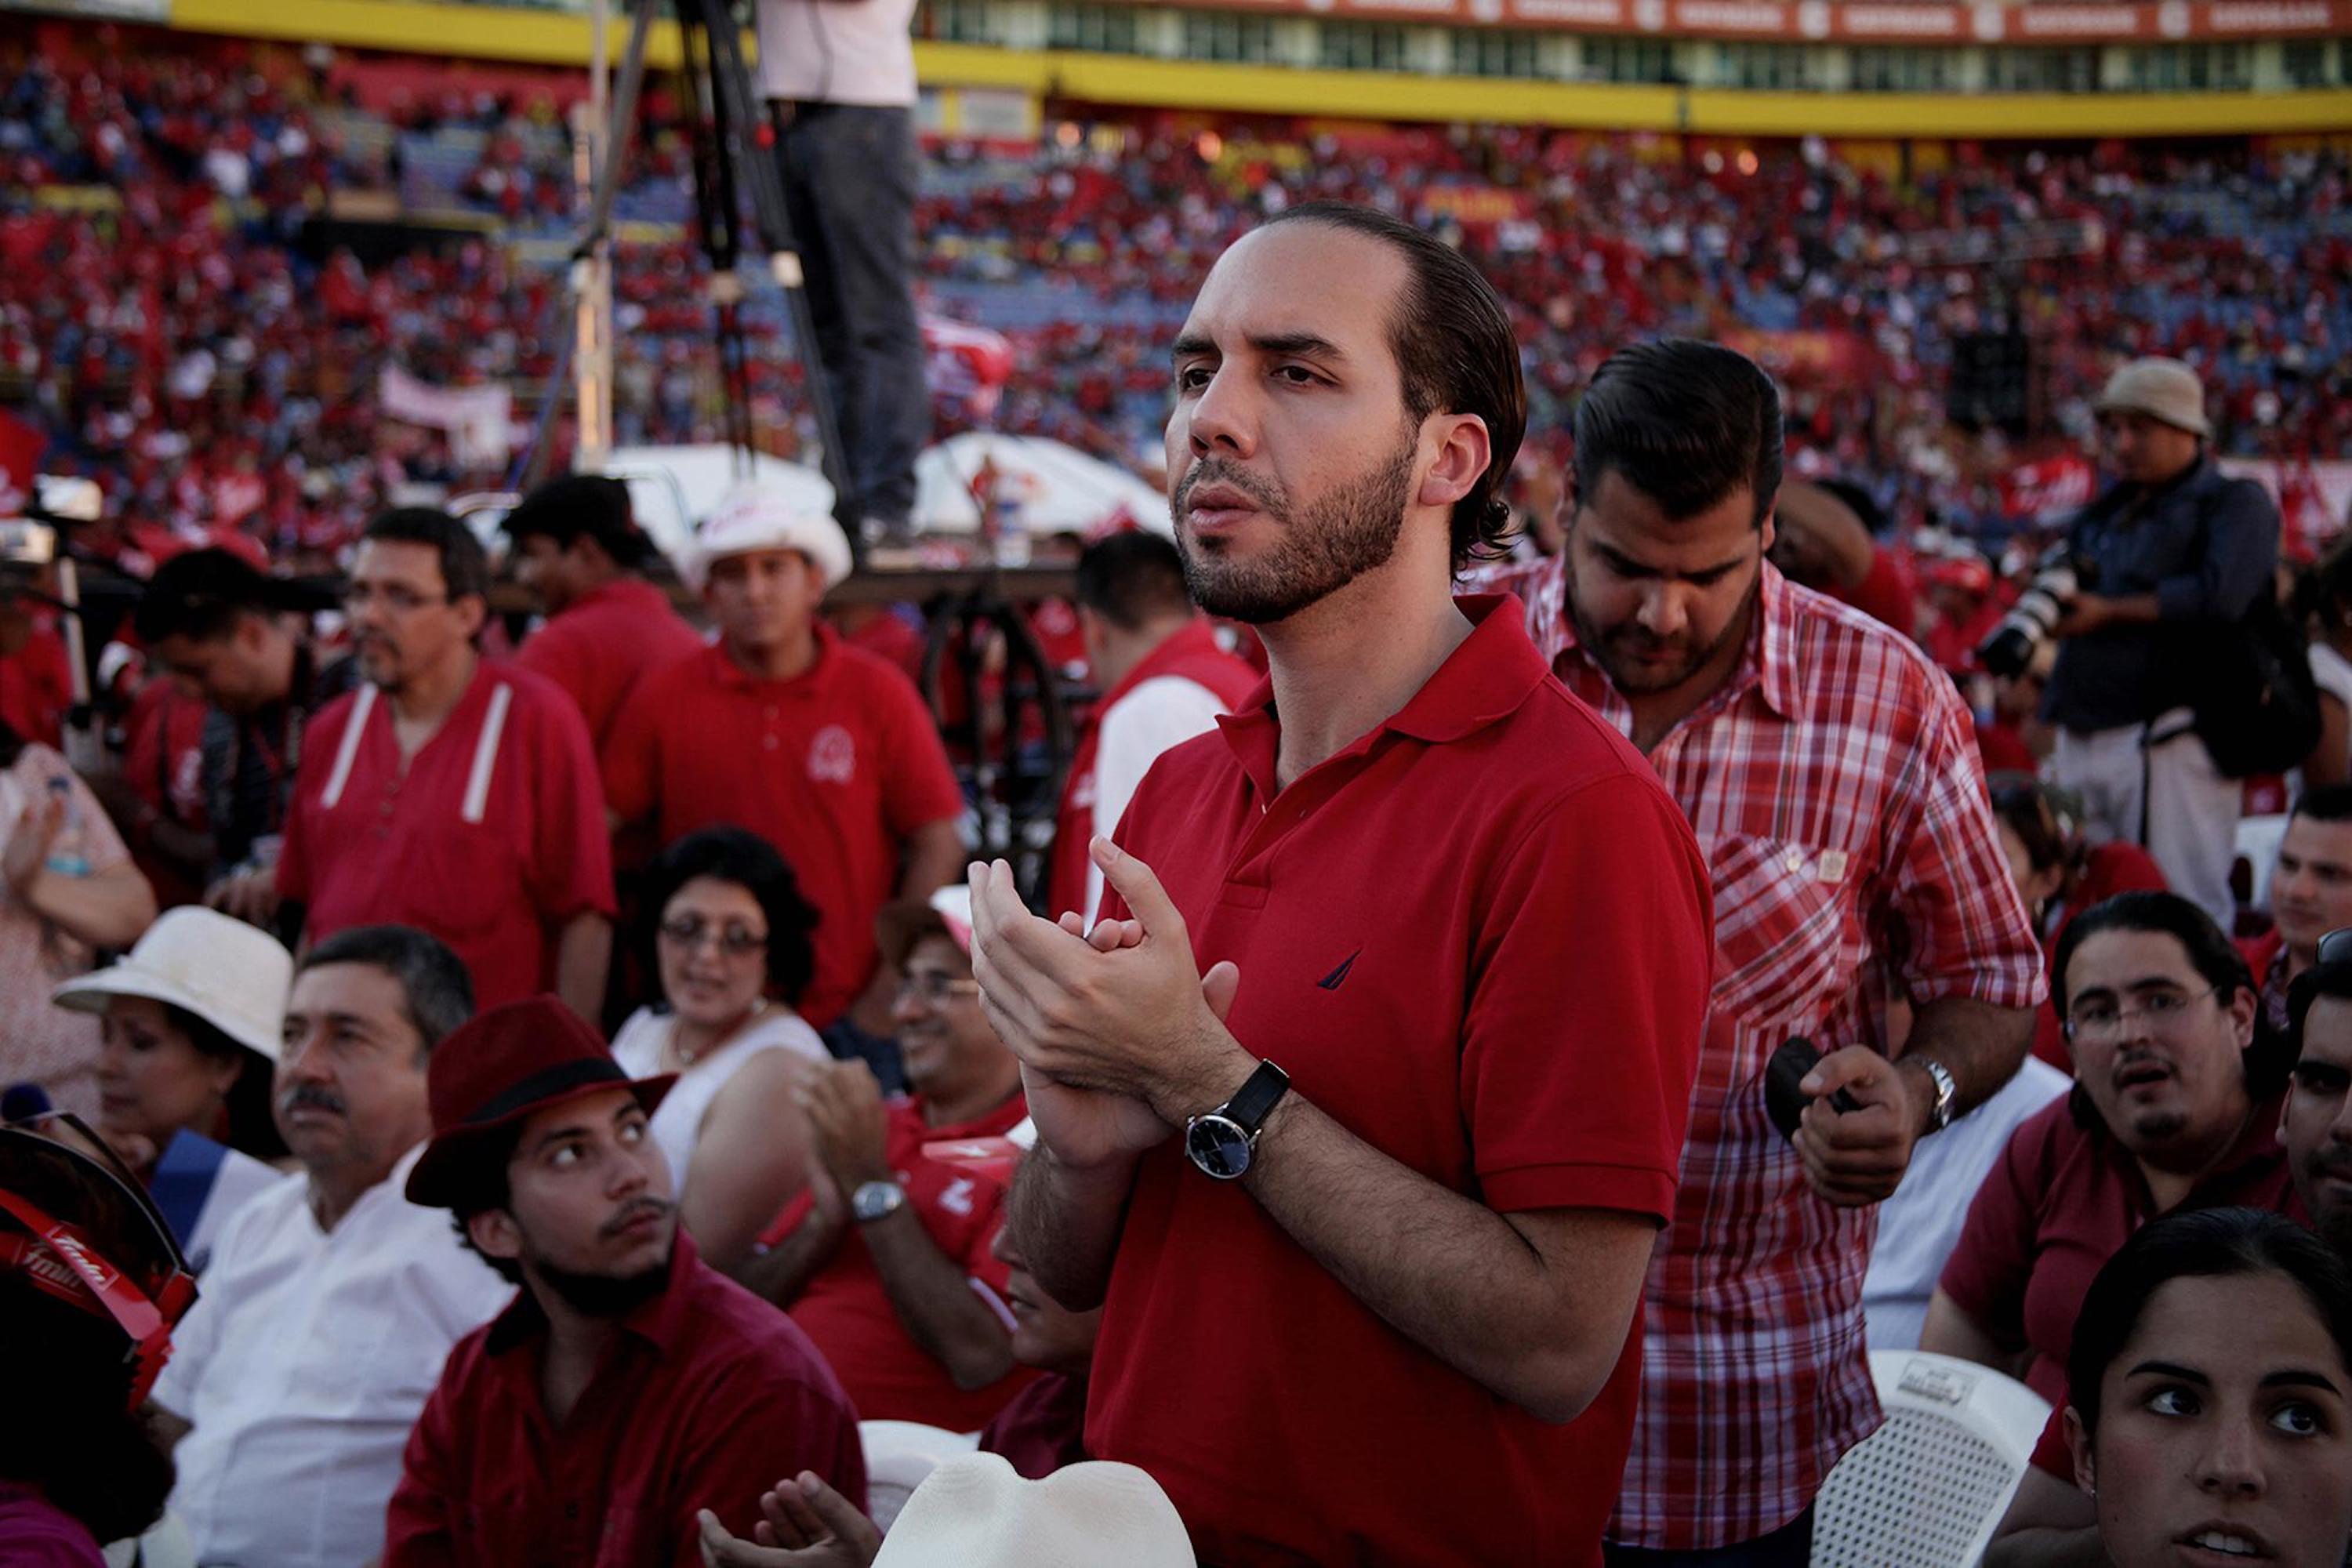 In November of 2012 Nayib Bukele attended the FMLN general assembly in San Salvador's Cuscatlán Stadium. THe congregants ratified the presidential candidacy of former guerrilla commander Salvador Sánchez Cerén, who would go on to govern from 2014 to 2019. Photo: El Faro Archive